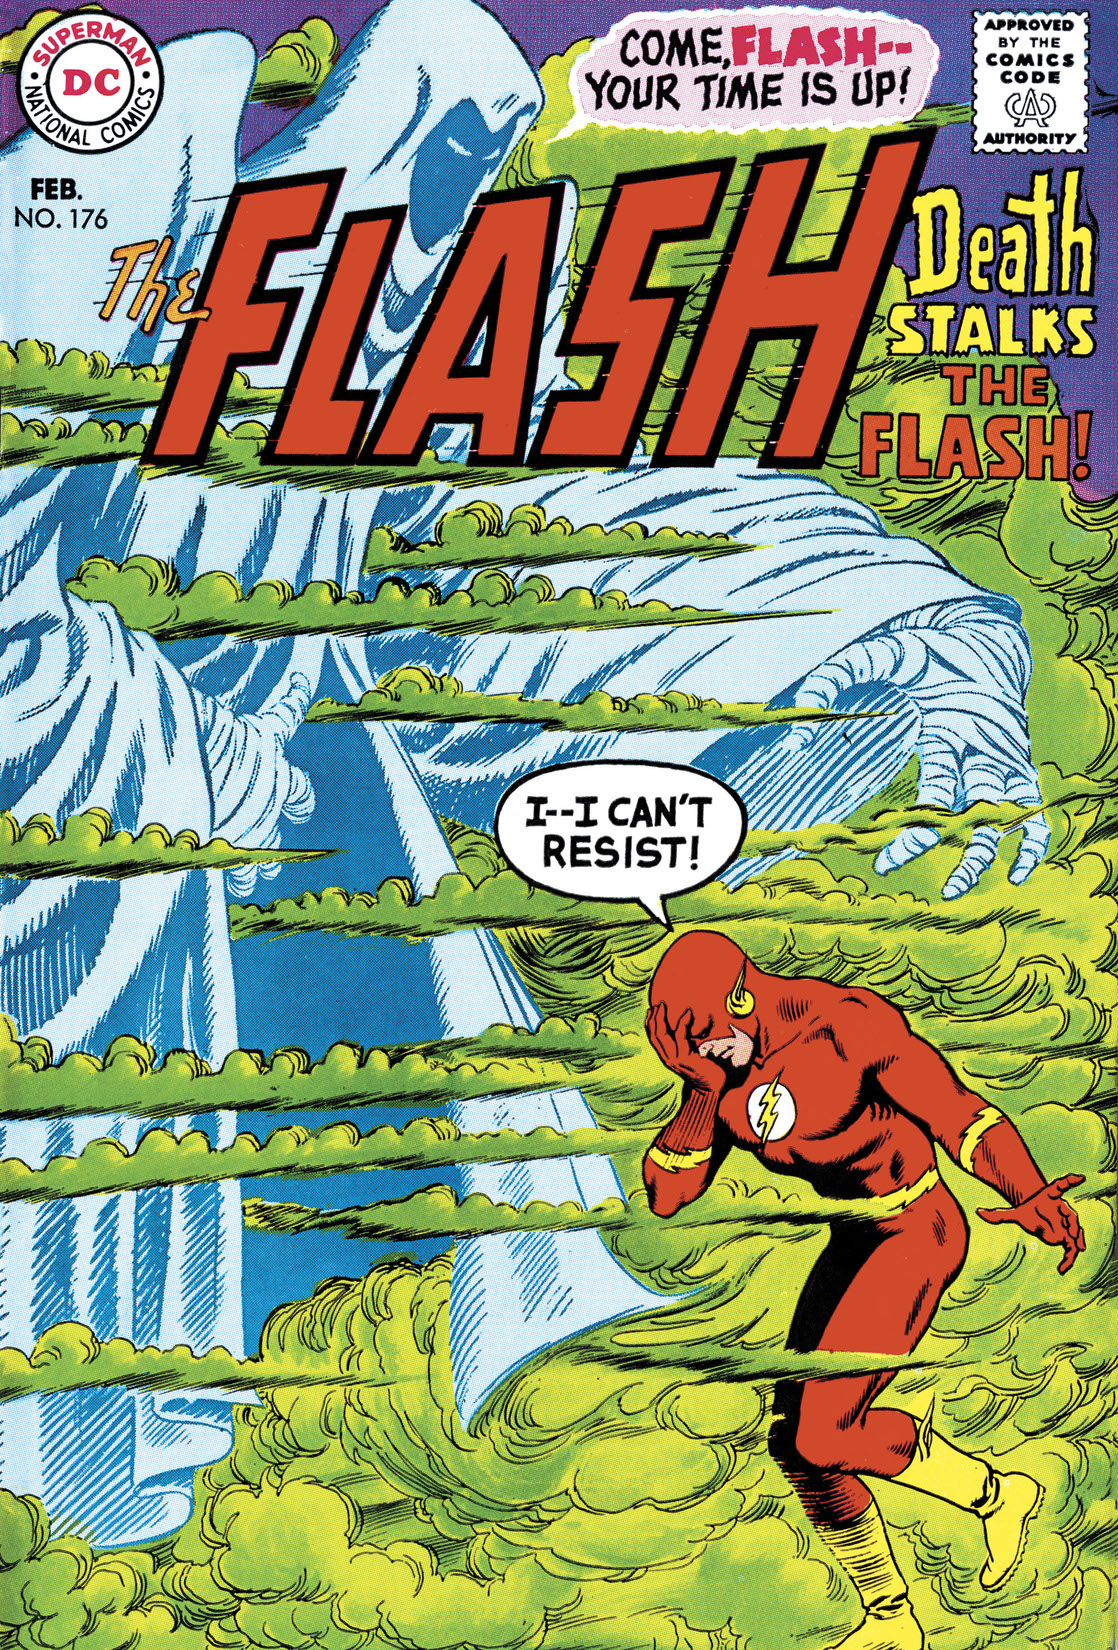 The Flash (1959-) #176 preview images